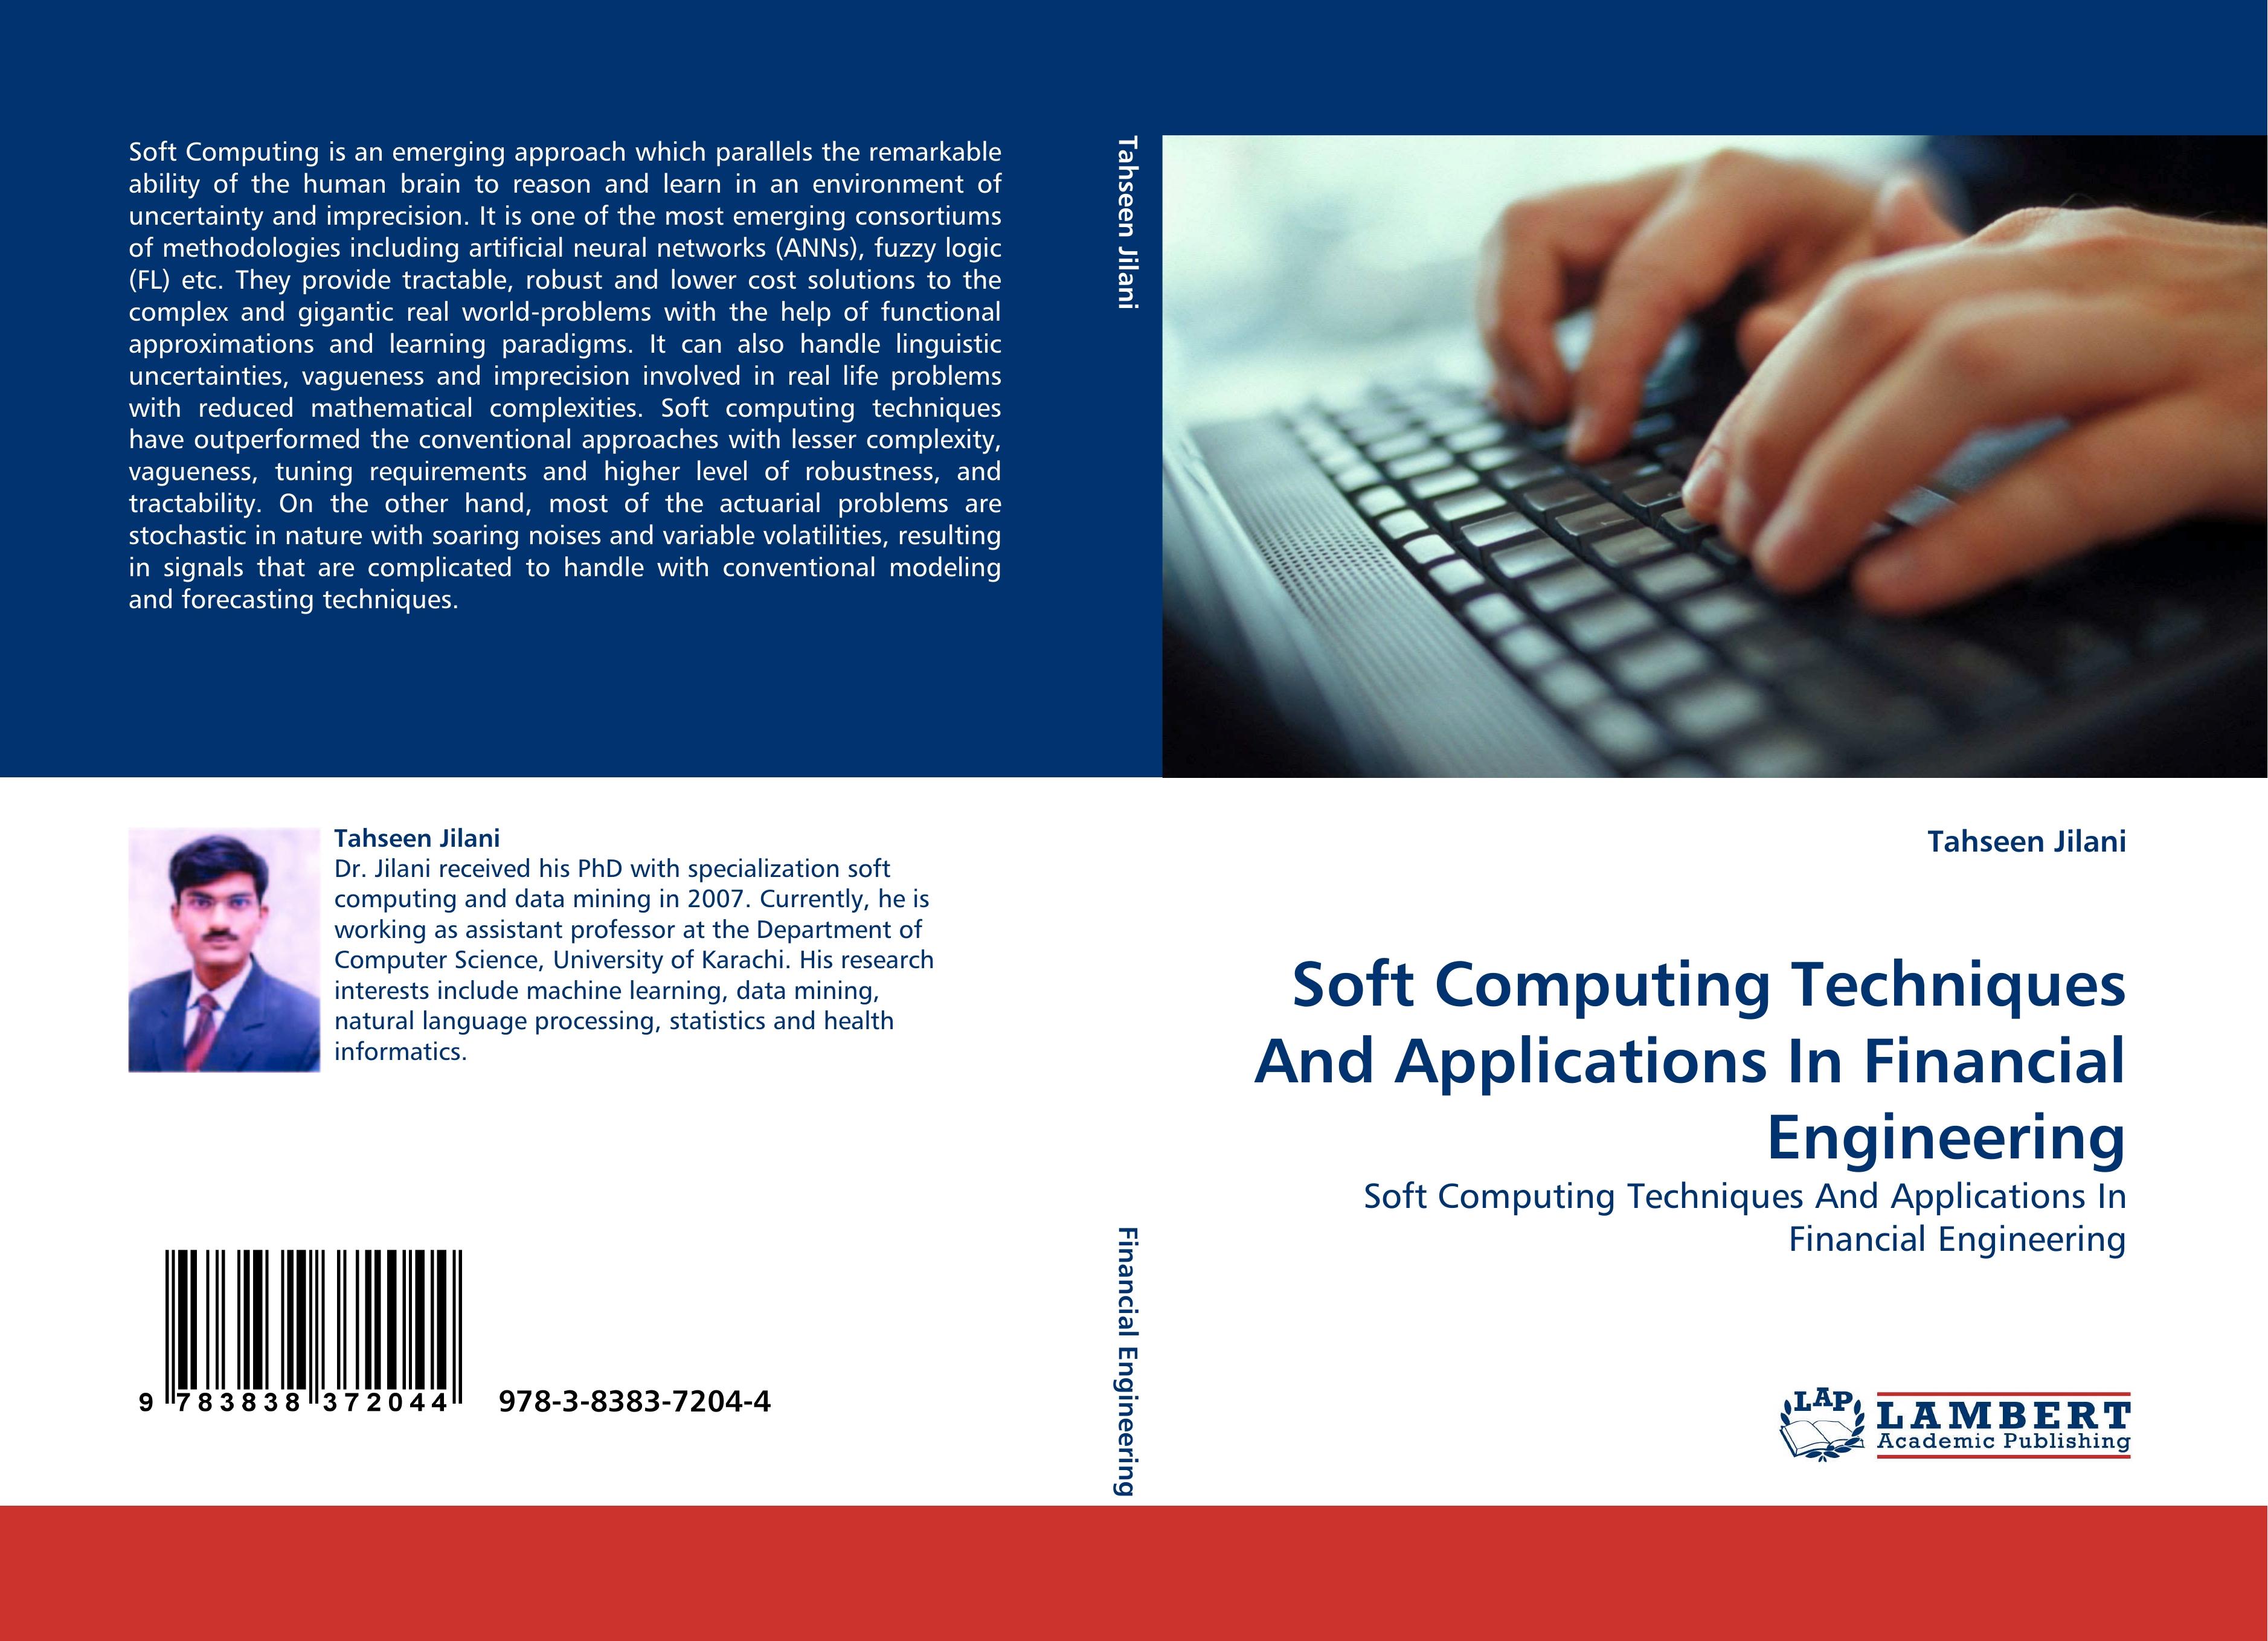 Soft Computing Techniques And Applications In Financial Engineering - Tahseen Jilani